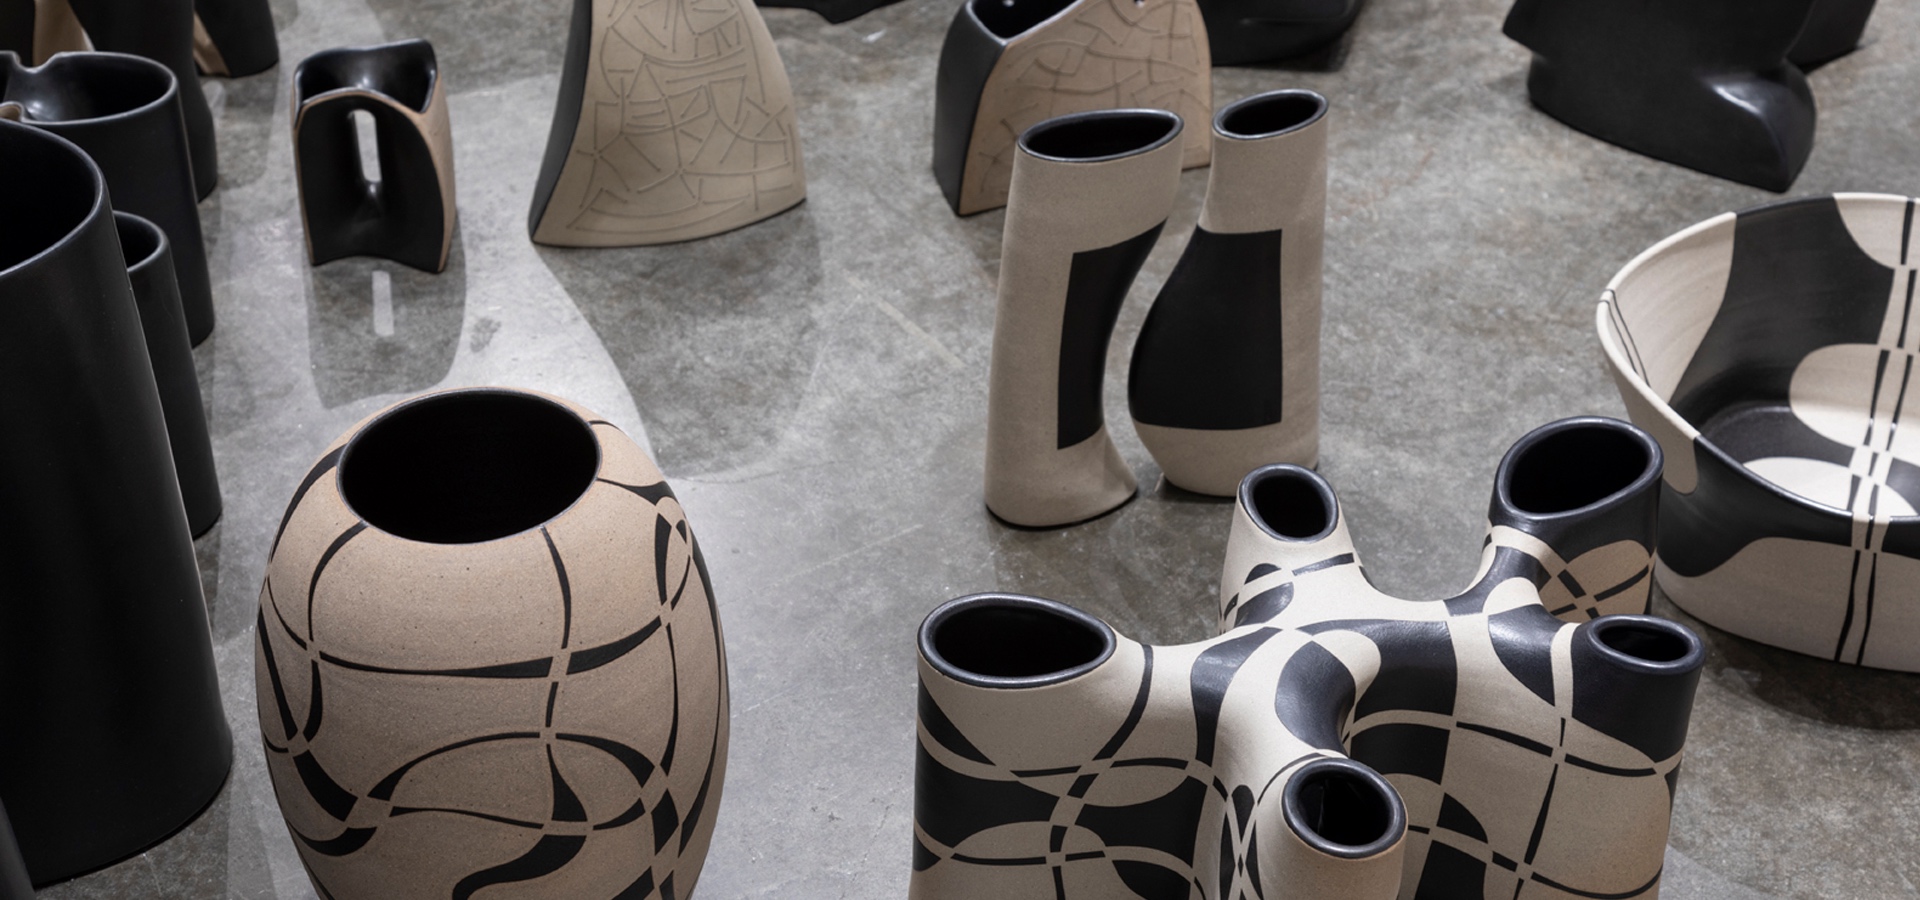 Black and white ceramics laid on the floor as seen from above